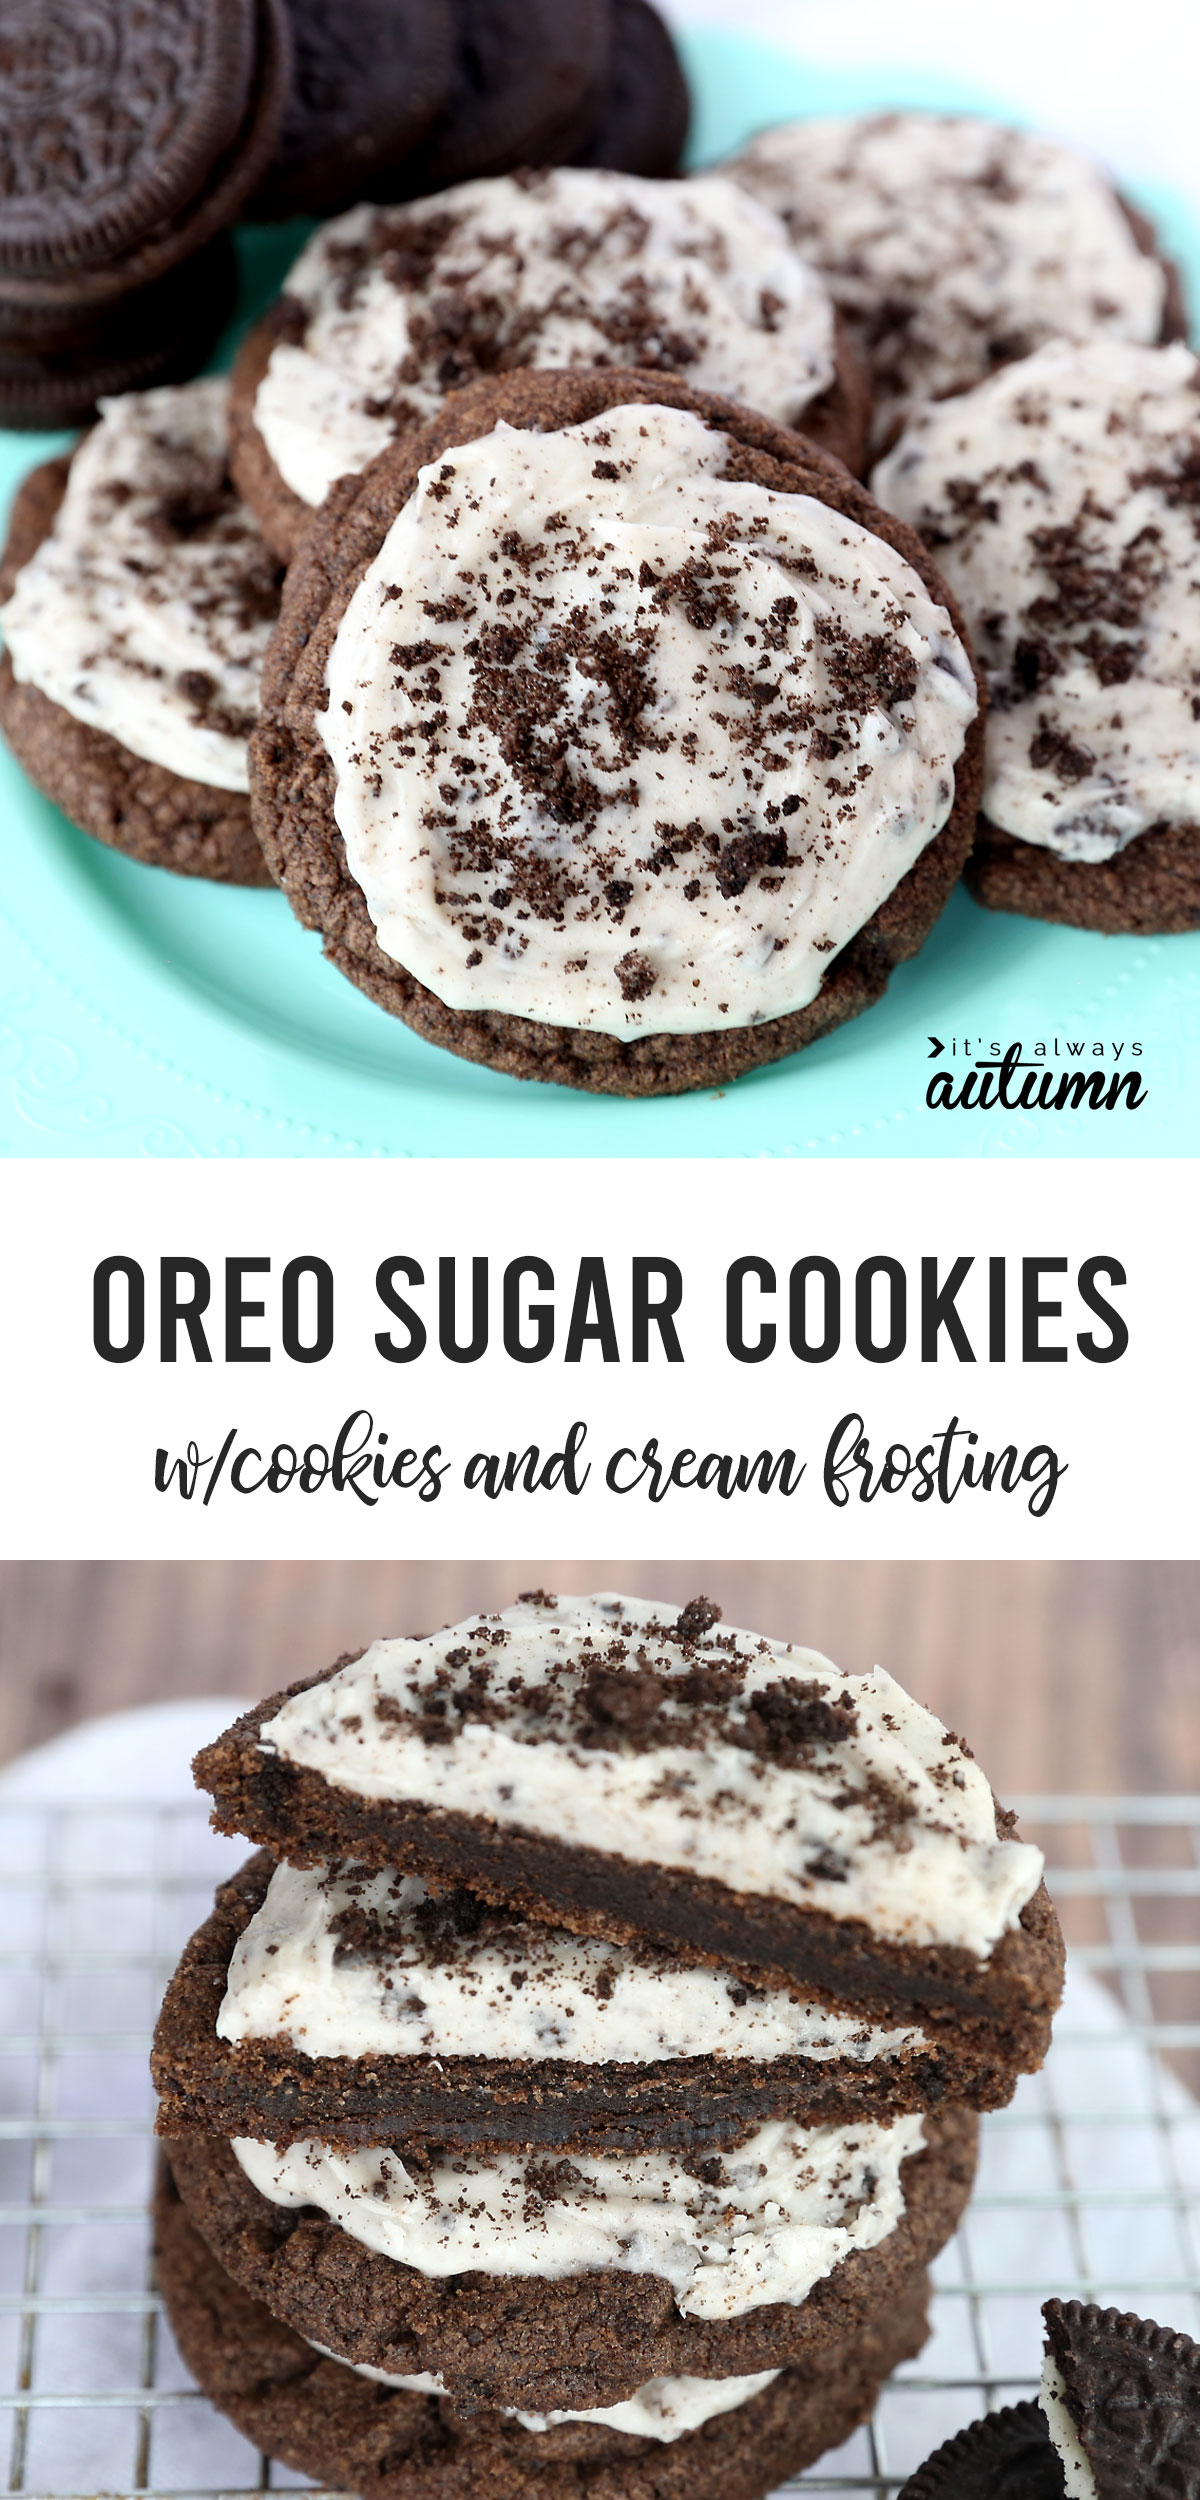 Oreo sugar cookies with cookies and cream frosting